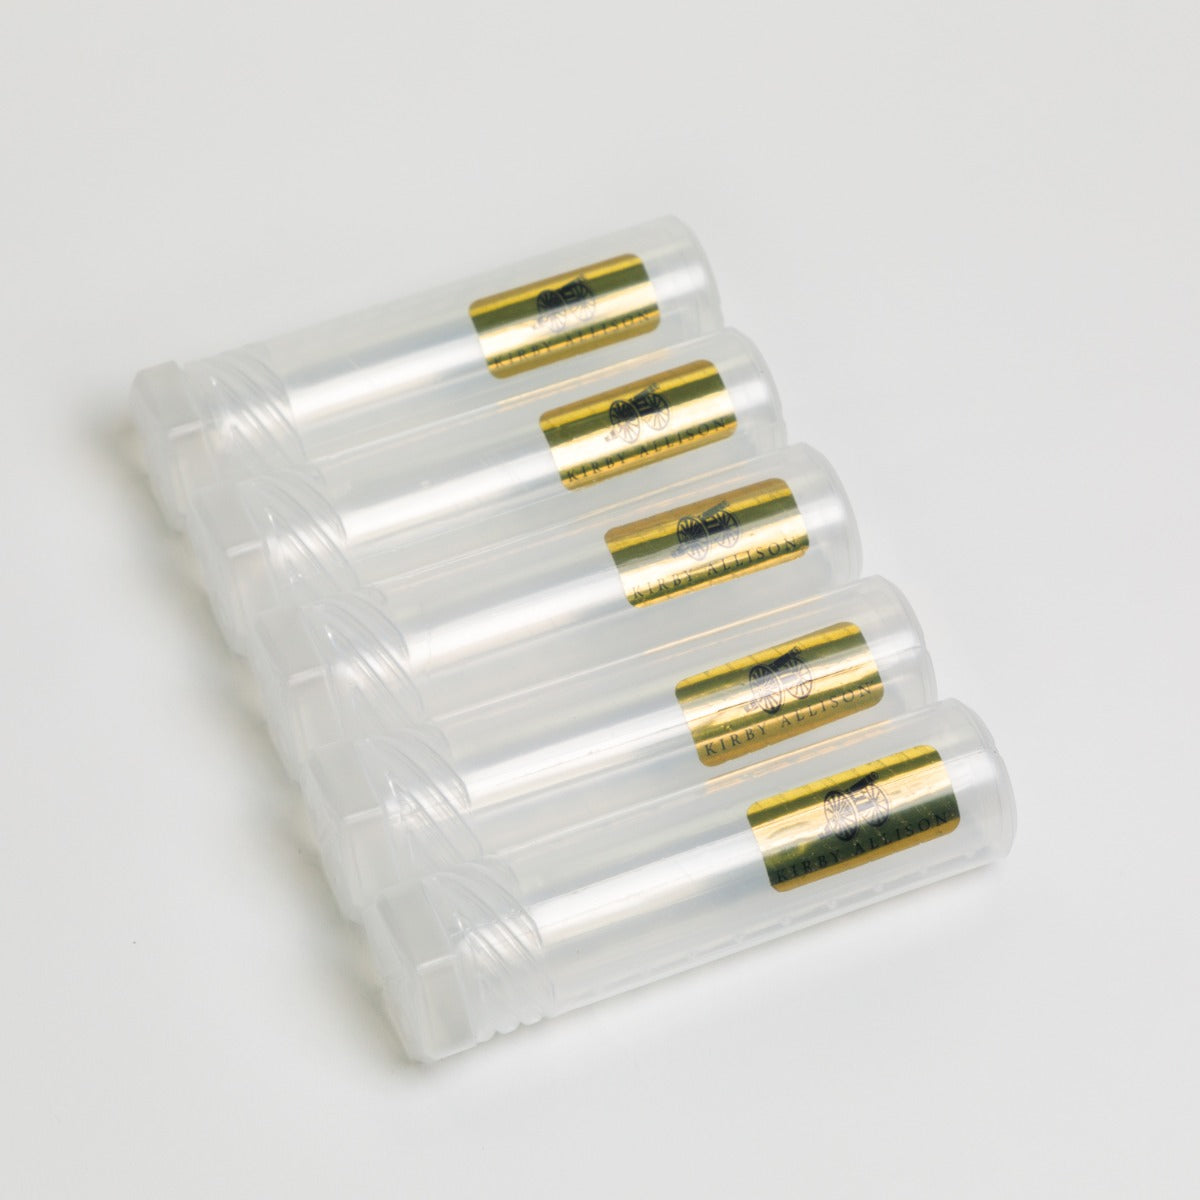 A group of Kirby Allison Plastic Cigar Storage Tubes (Set of 5) with gold lids on a white surface.